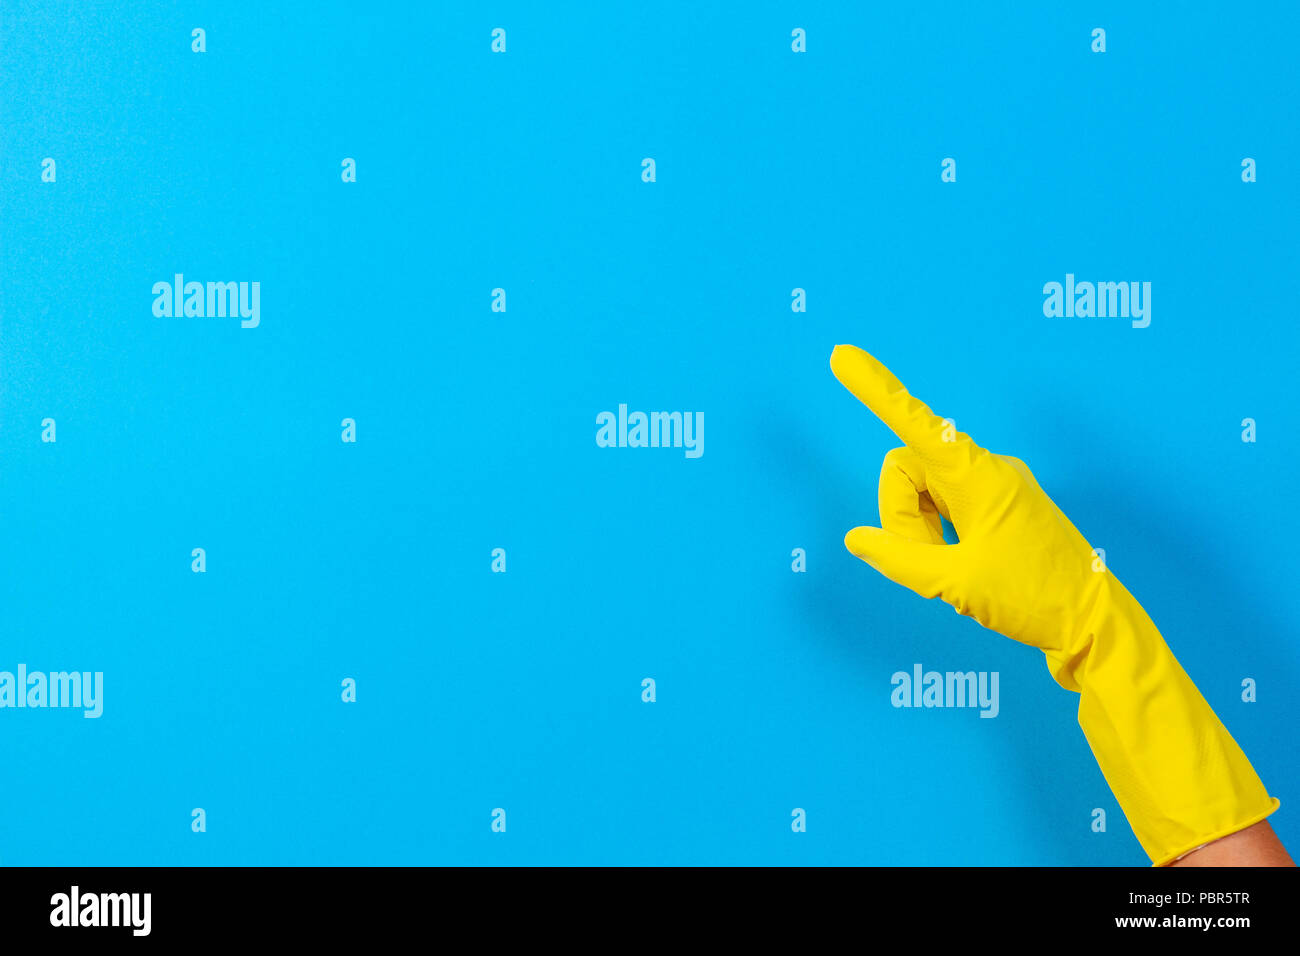 Woman hand with yellow rubber glove points upwards with index finger, blue background Stock Photo